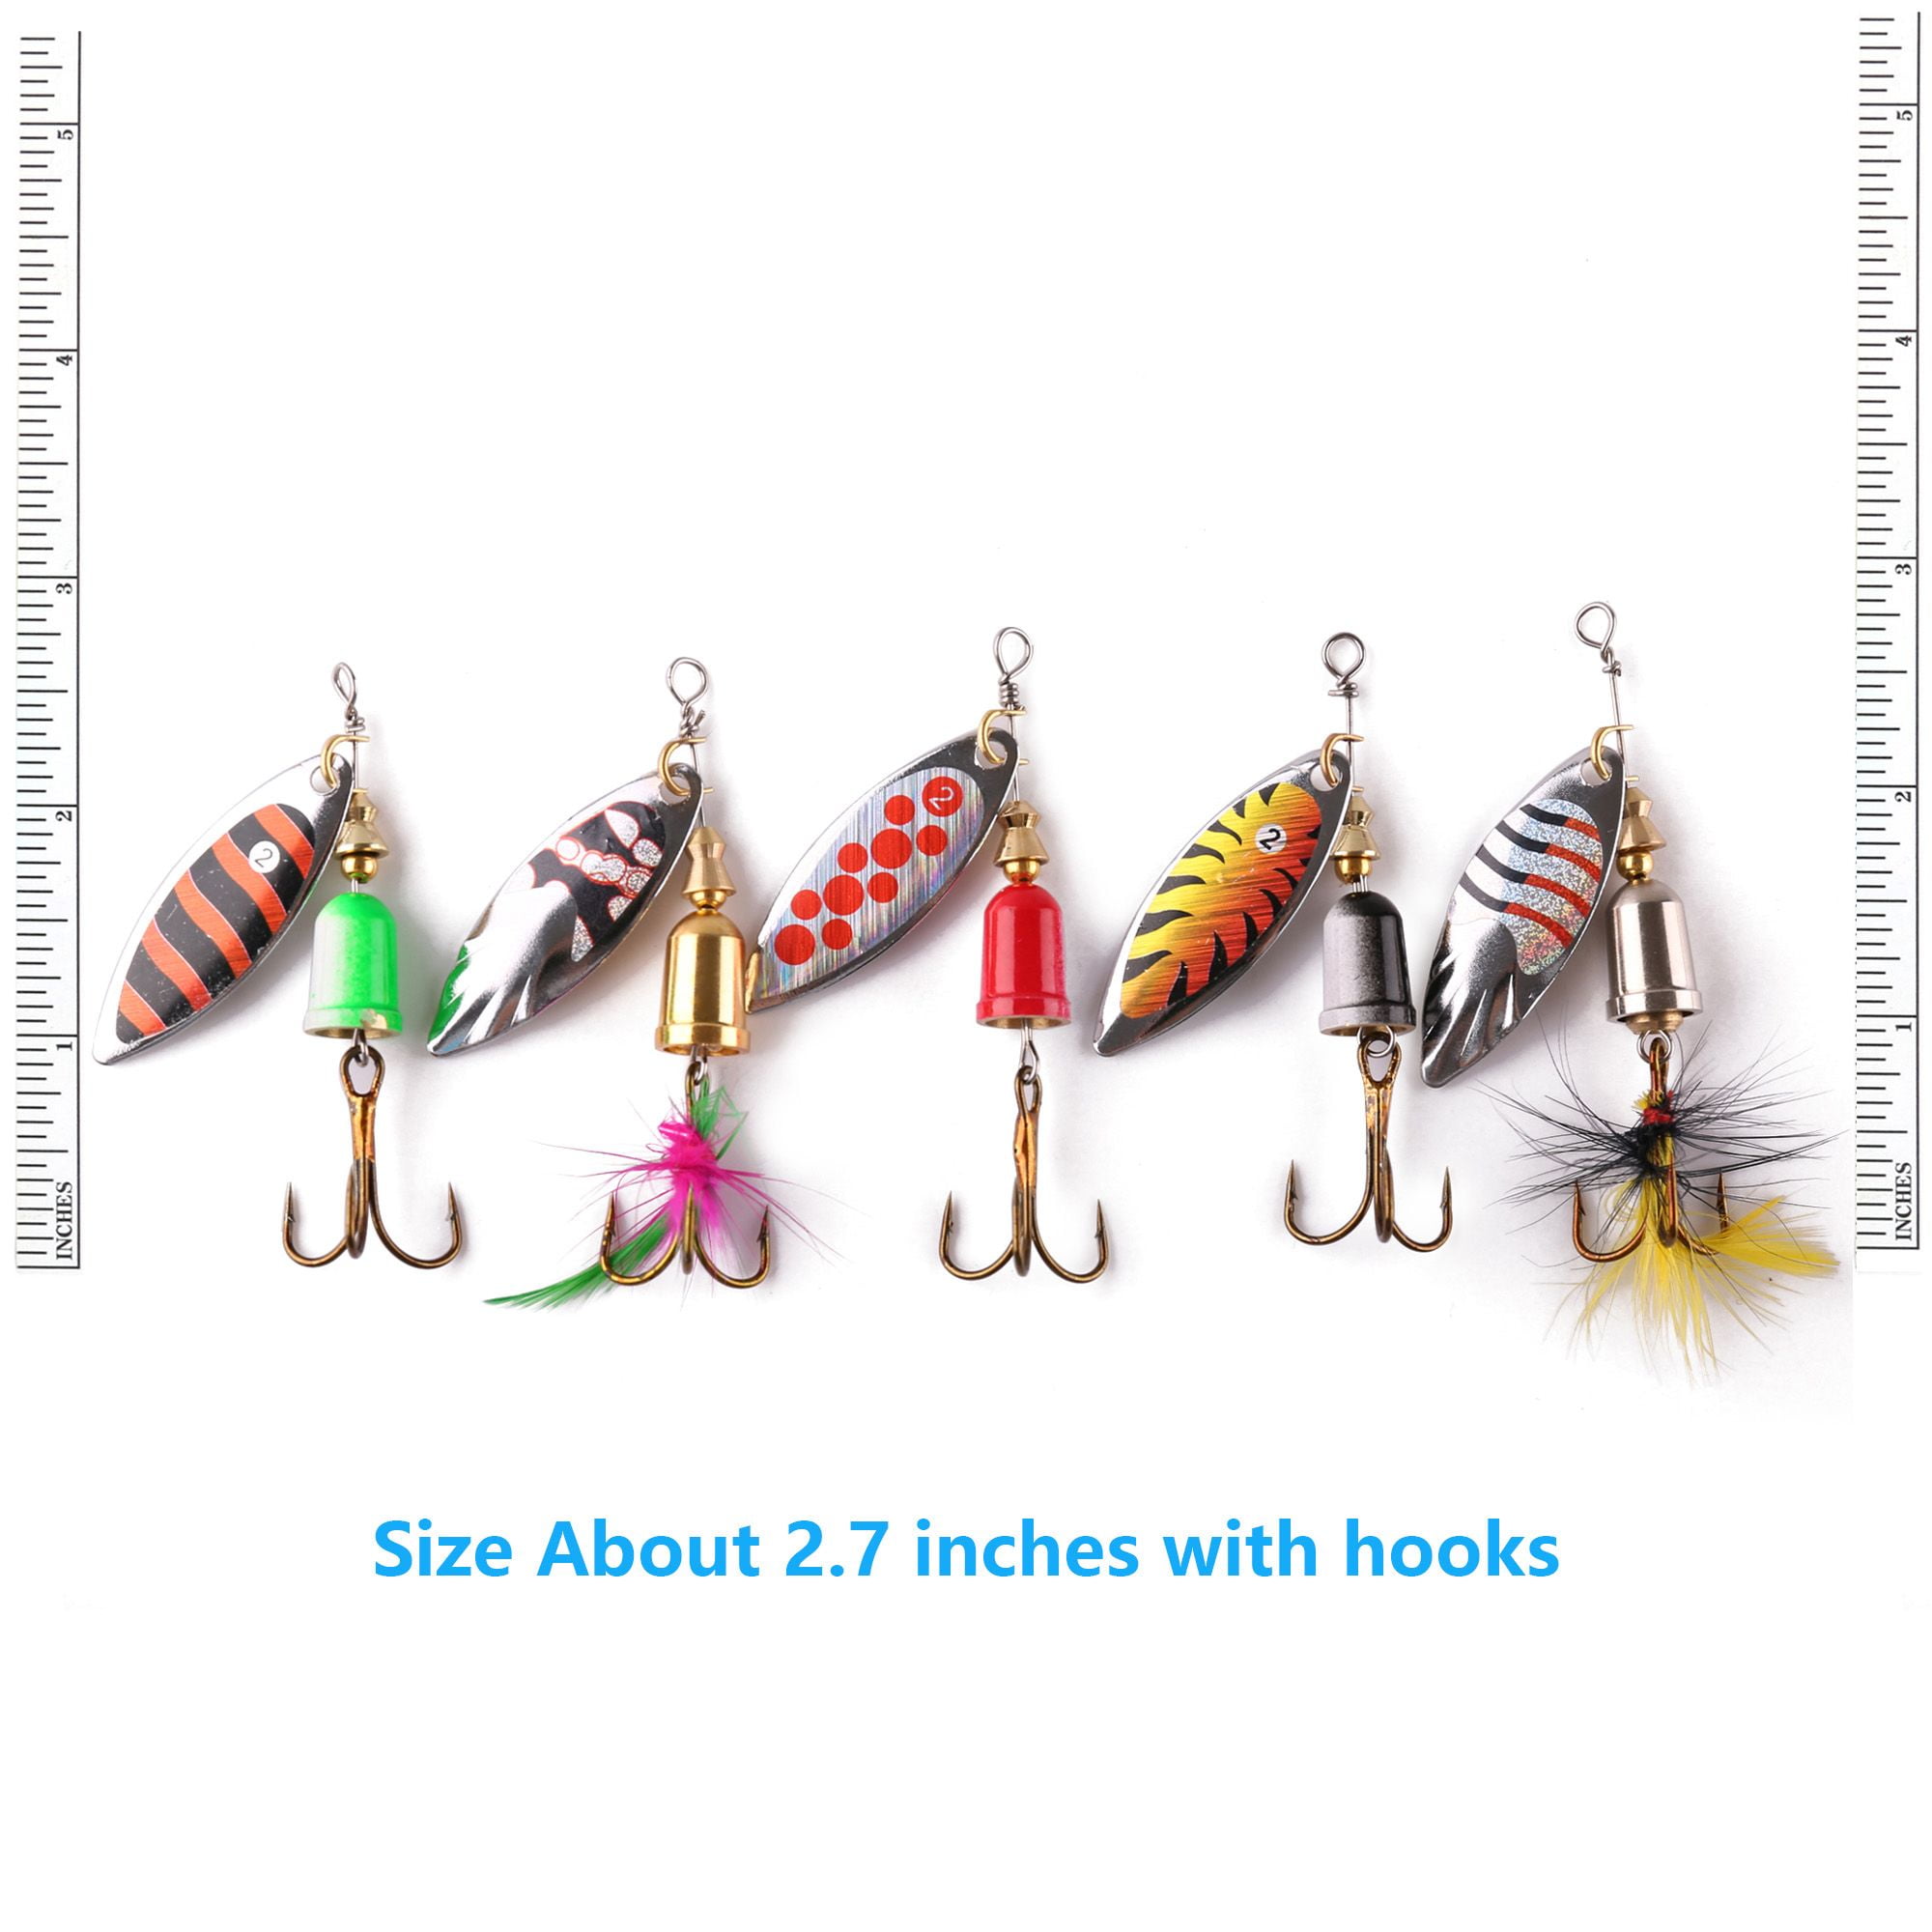 Fishing Lures 10pcs Spinner Lures Baits with Tackle Box, Bass Trout Salmon  Hard Metal Rooster Tail Fishing Lures Kit by FouceClaus